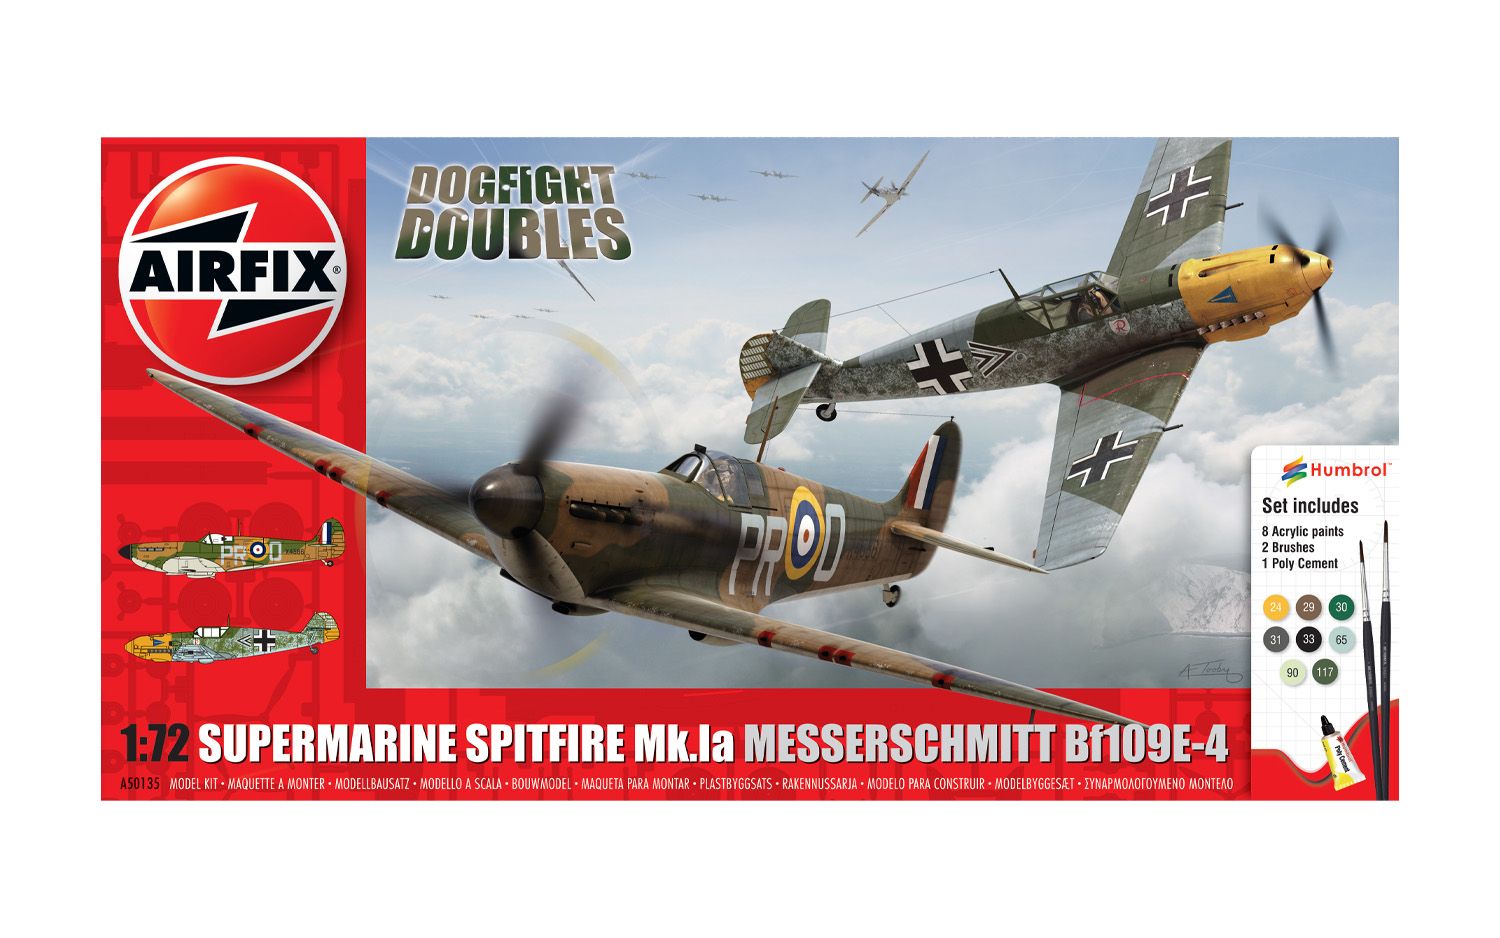 Spitfire MkIa and Messerschmitt Bf109E-4 Dogfight Doubles Gift Set (1:72) - Loaded Dice Barry Vale of Glamorgan CF64 3HD